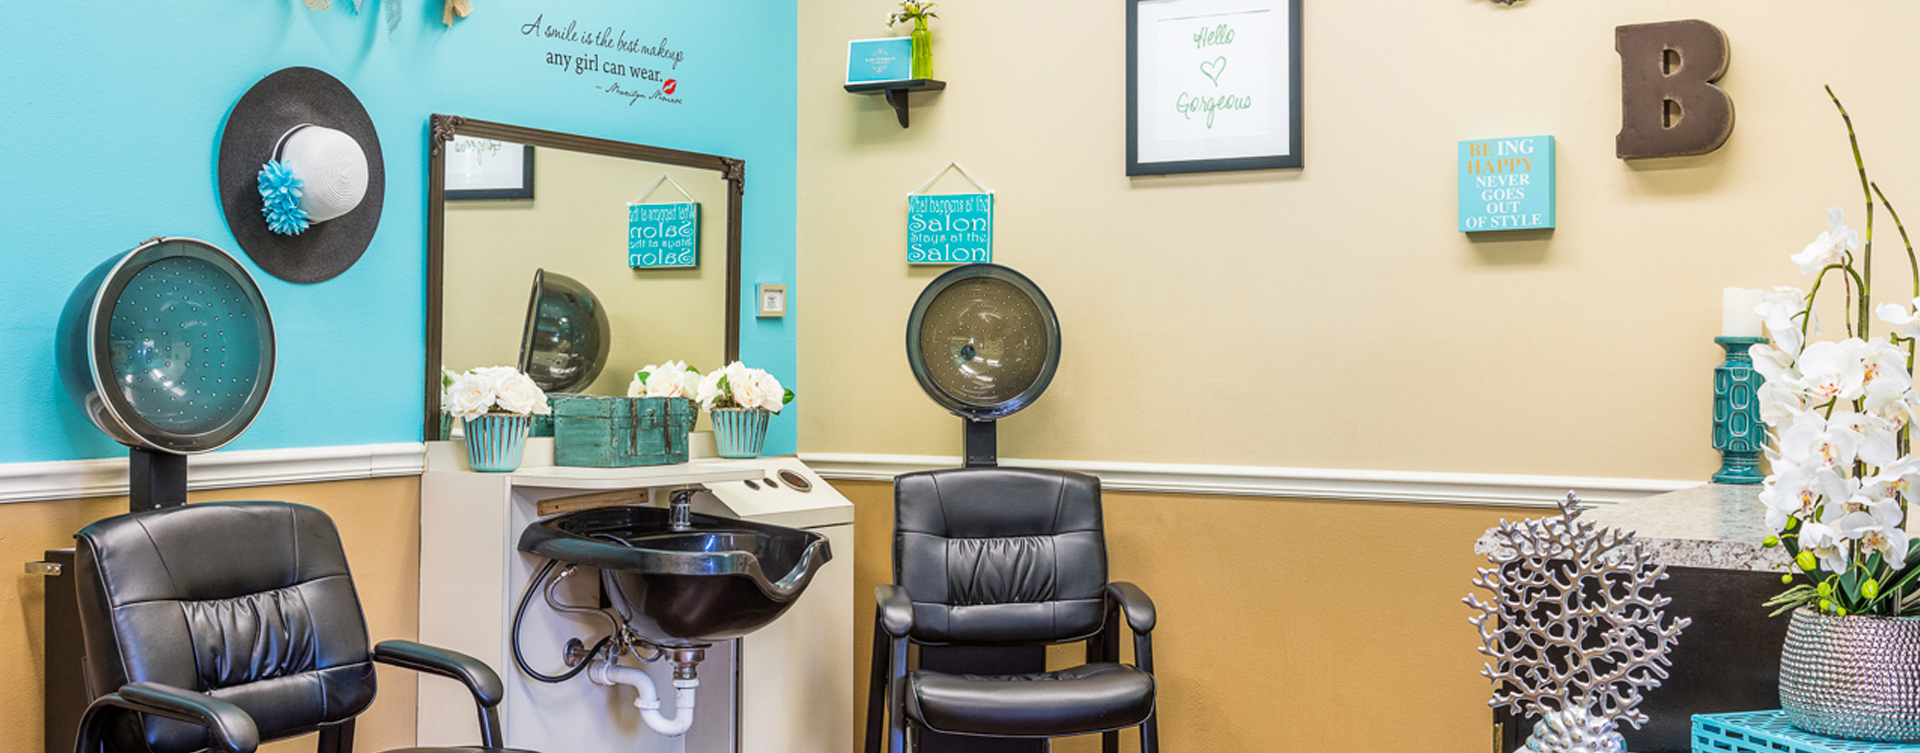 Strut on in and find out what the buzz is all about in the salon at Bickford of Ames